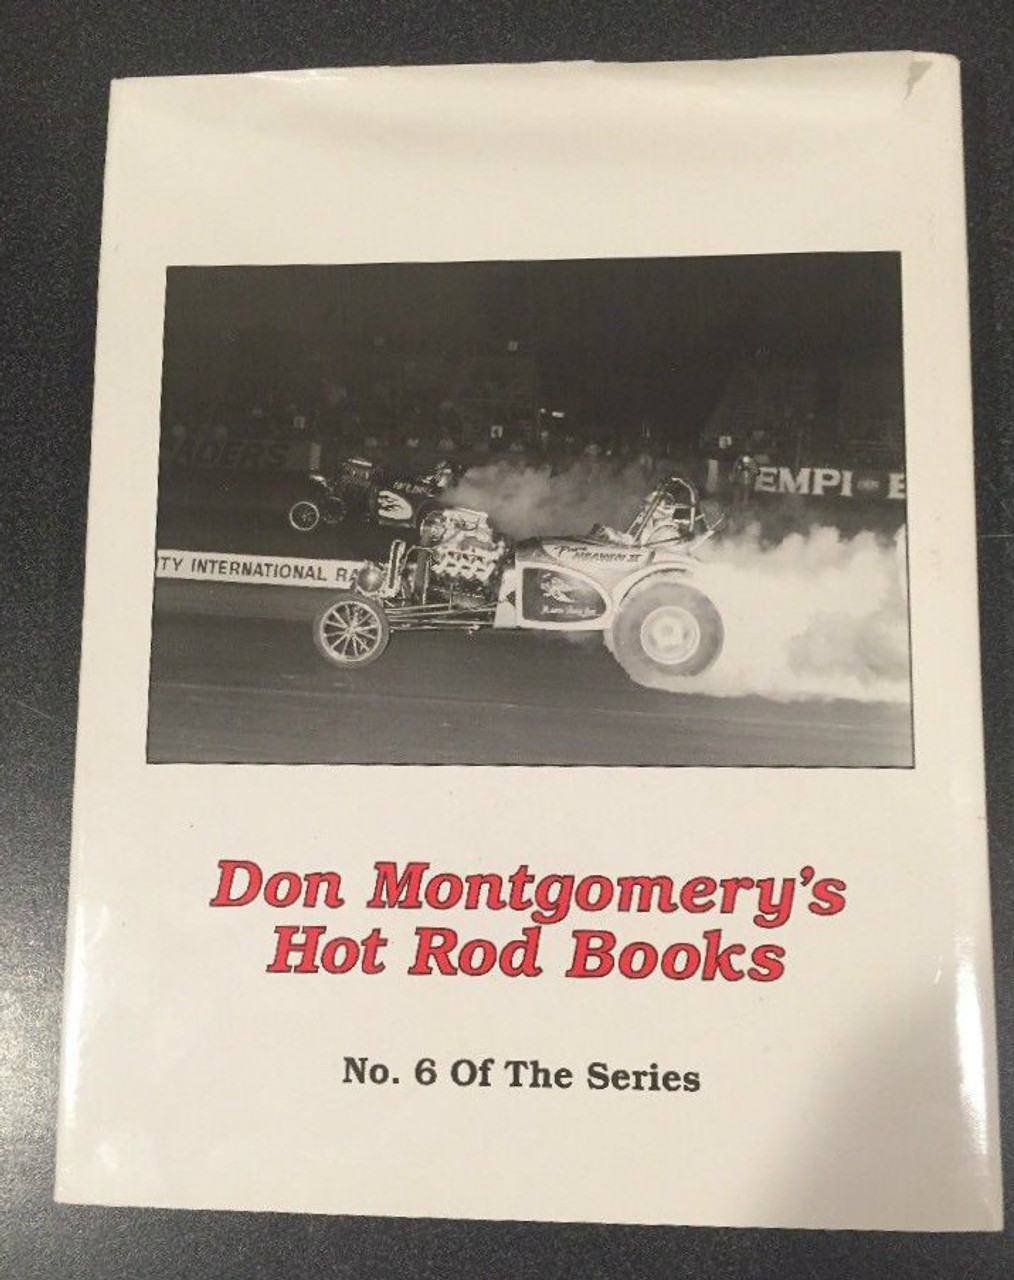 Those Wild Fuel Altereds:Drag Racing in the "Sixties" by Don Montgomery